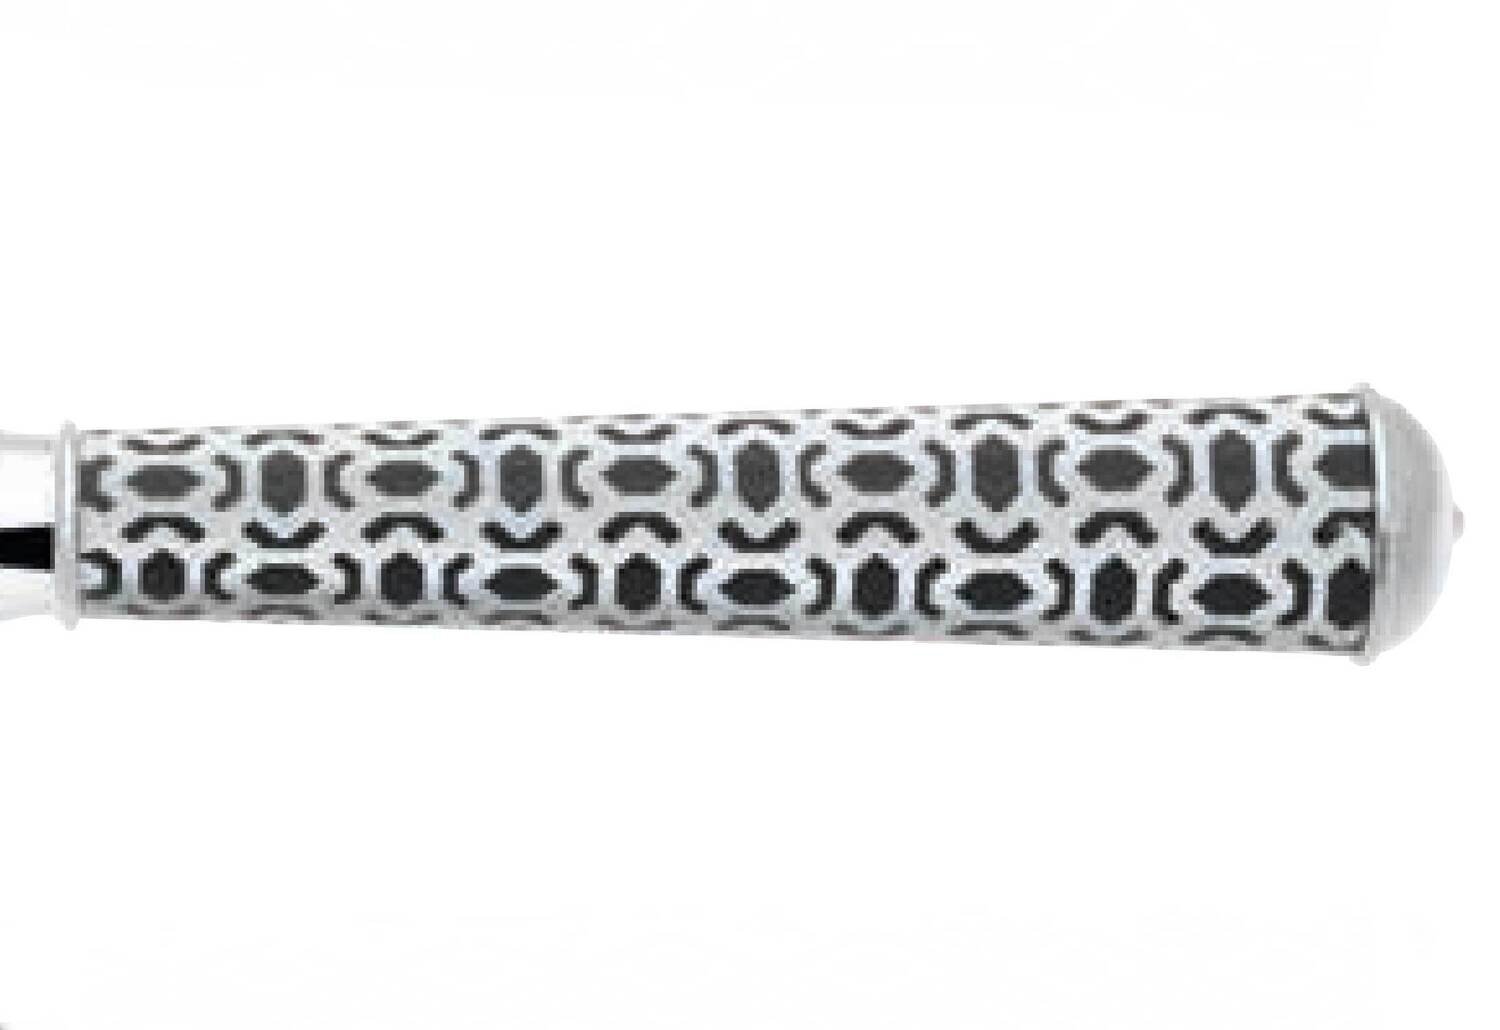 Ercuis Mosaique Black Fish Knife 8.375 Inch Silver Plated F600531-08